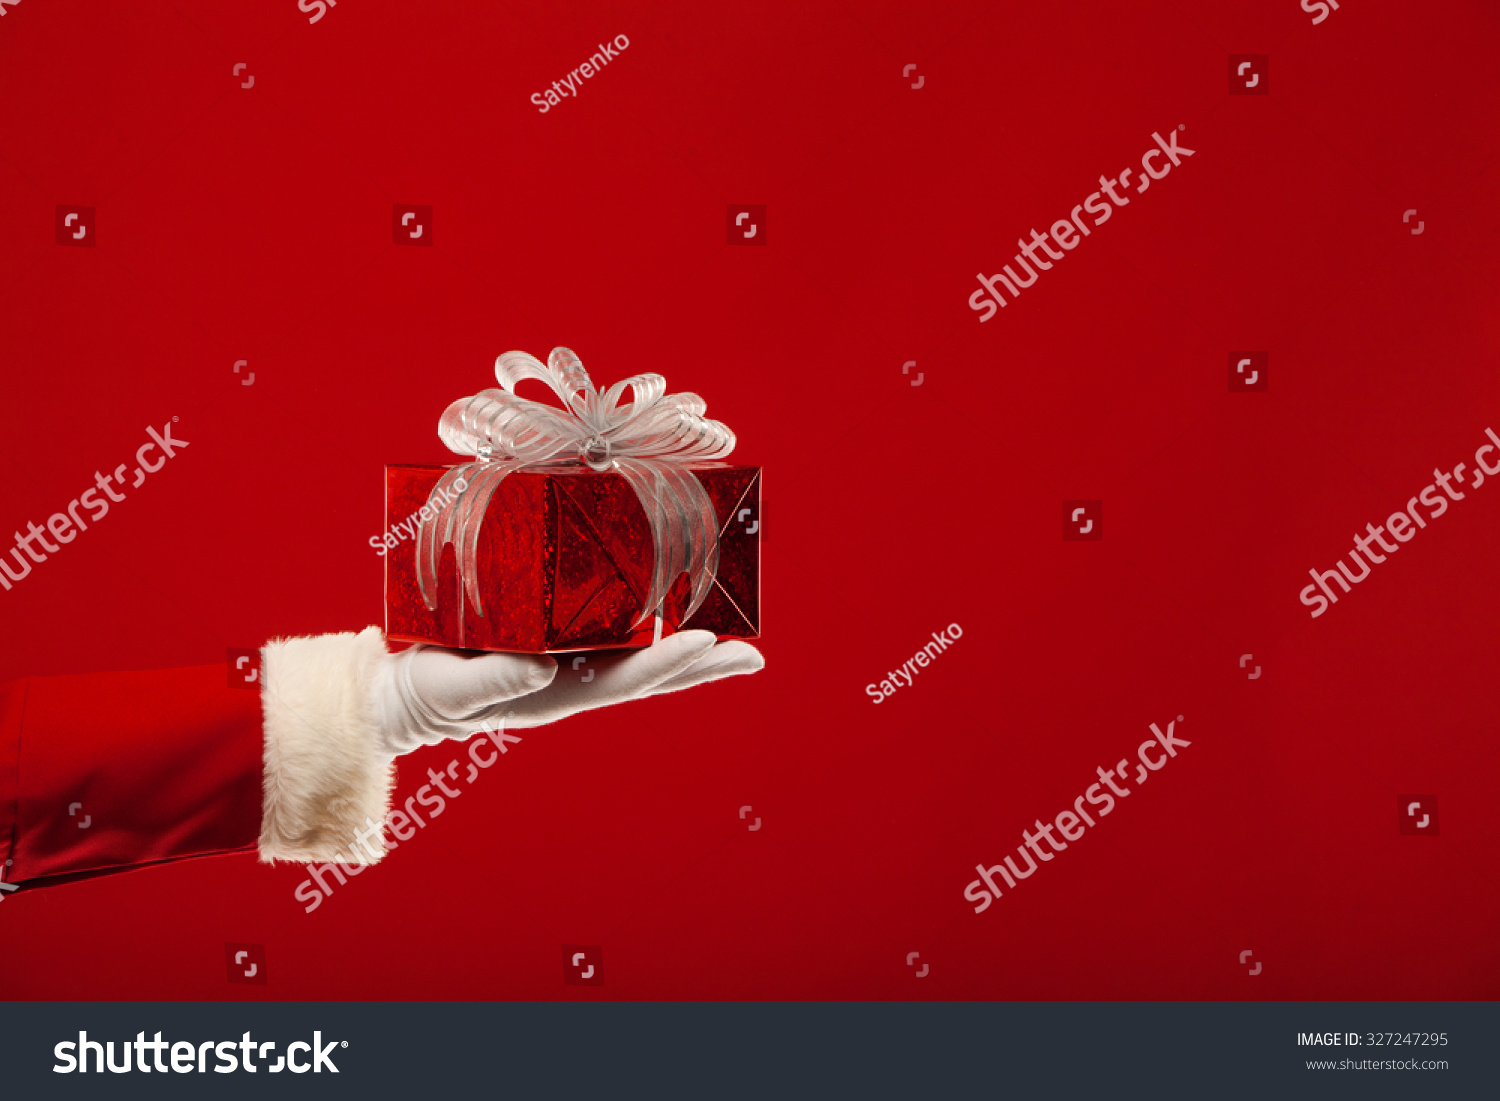 Christmas. Photo of Santa Claus gloved hand with red gift box, on a red background #327247295